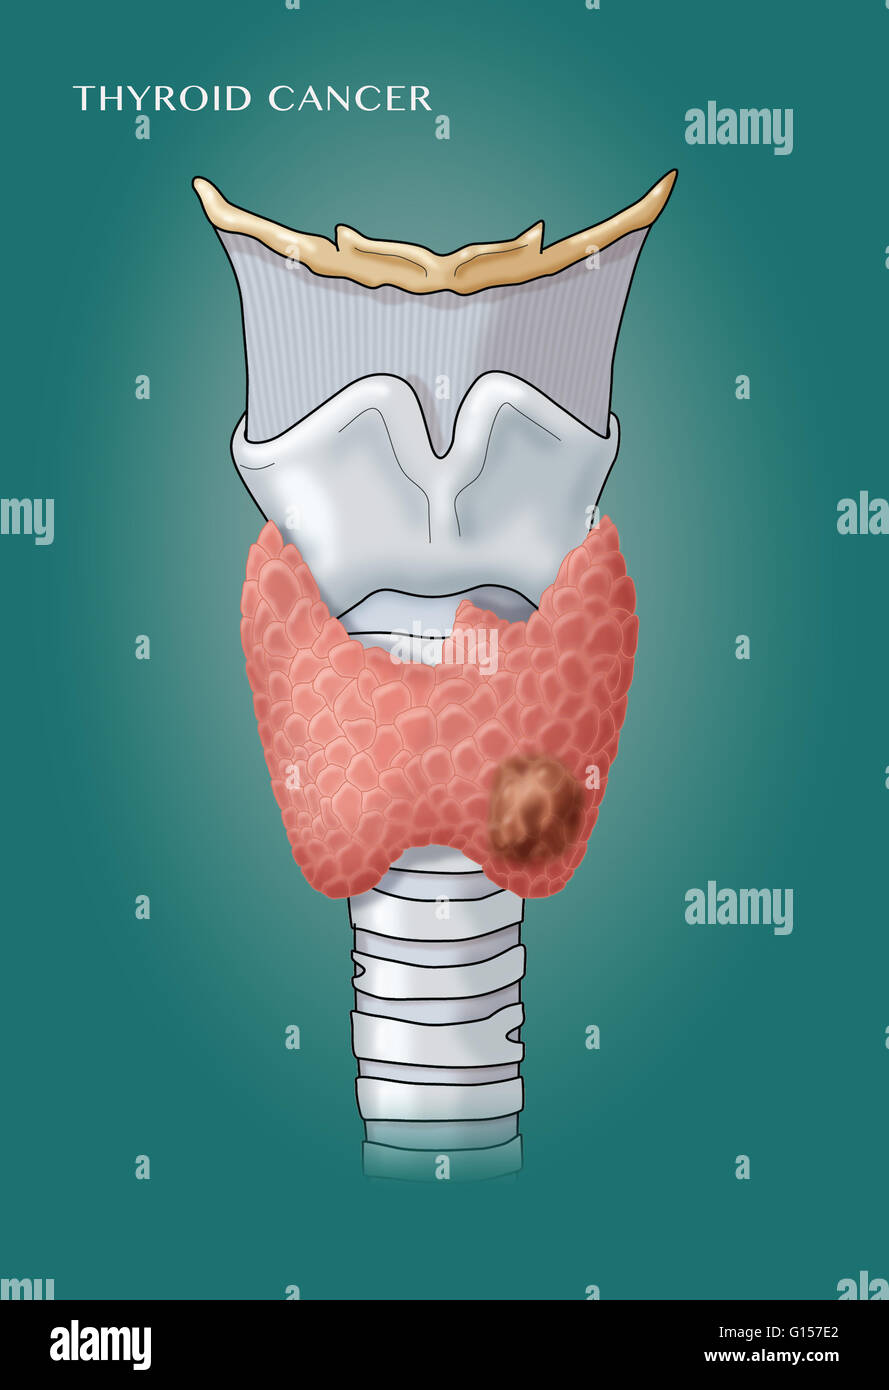 Labeled illustration of the larynx and thyroid gland, showing a malignant growth (thyroid cancer). Stock Photo